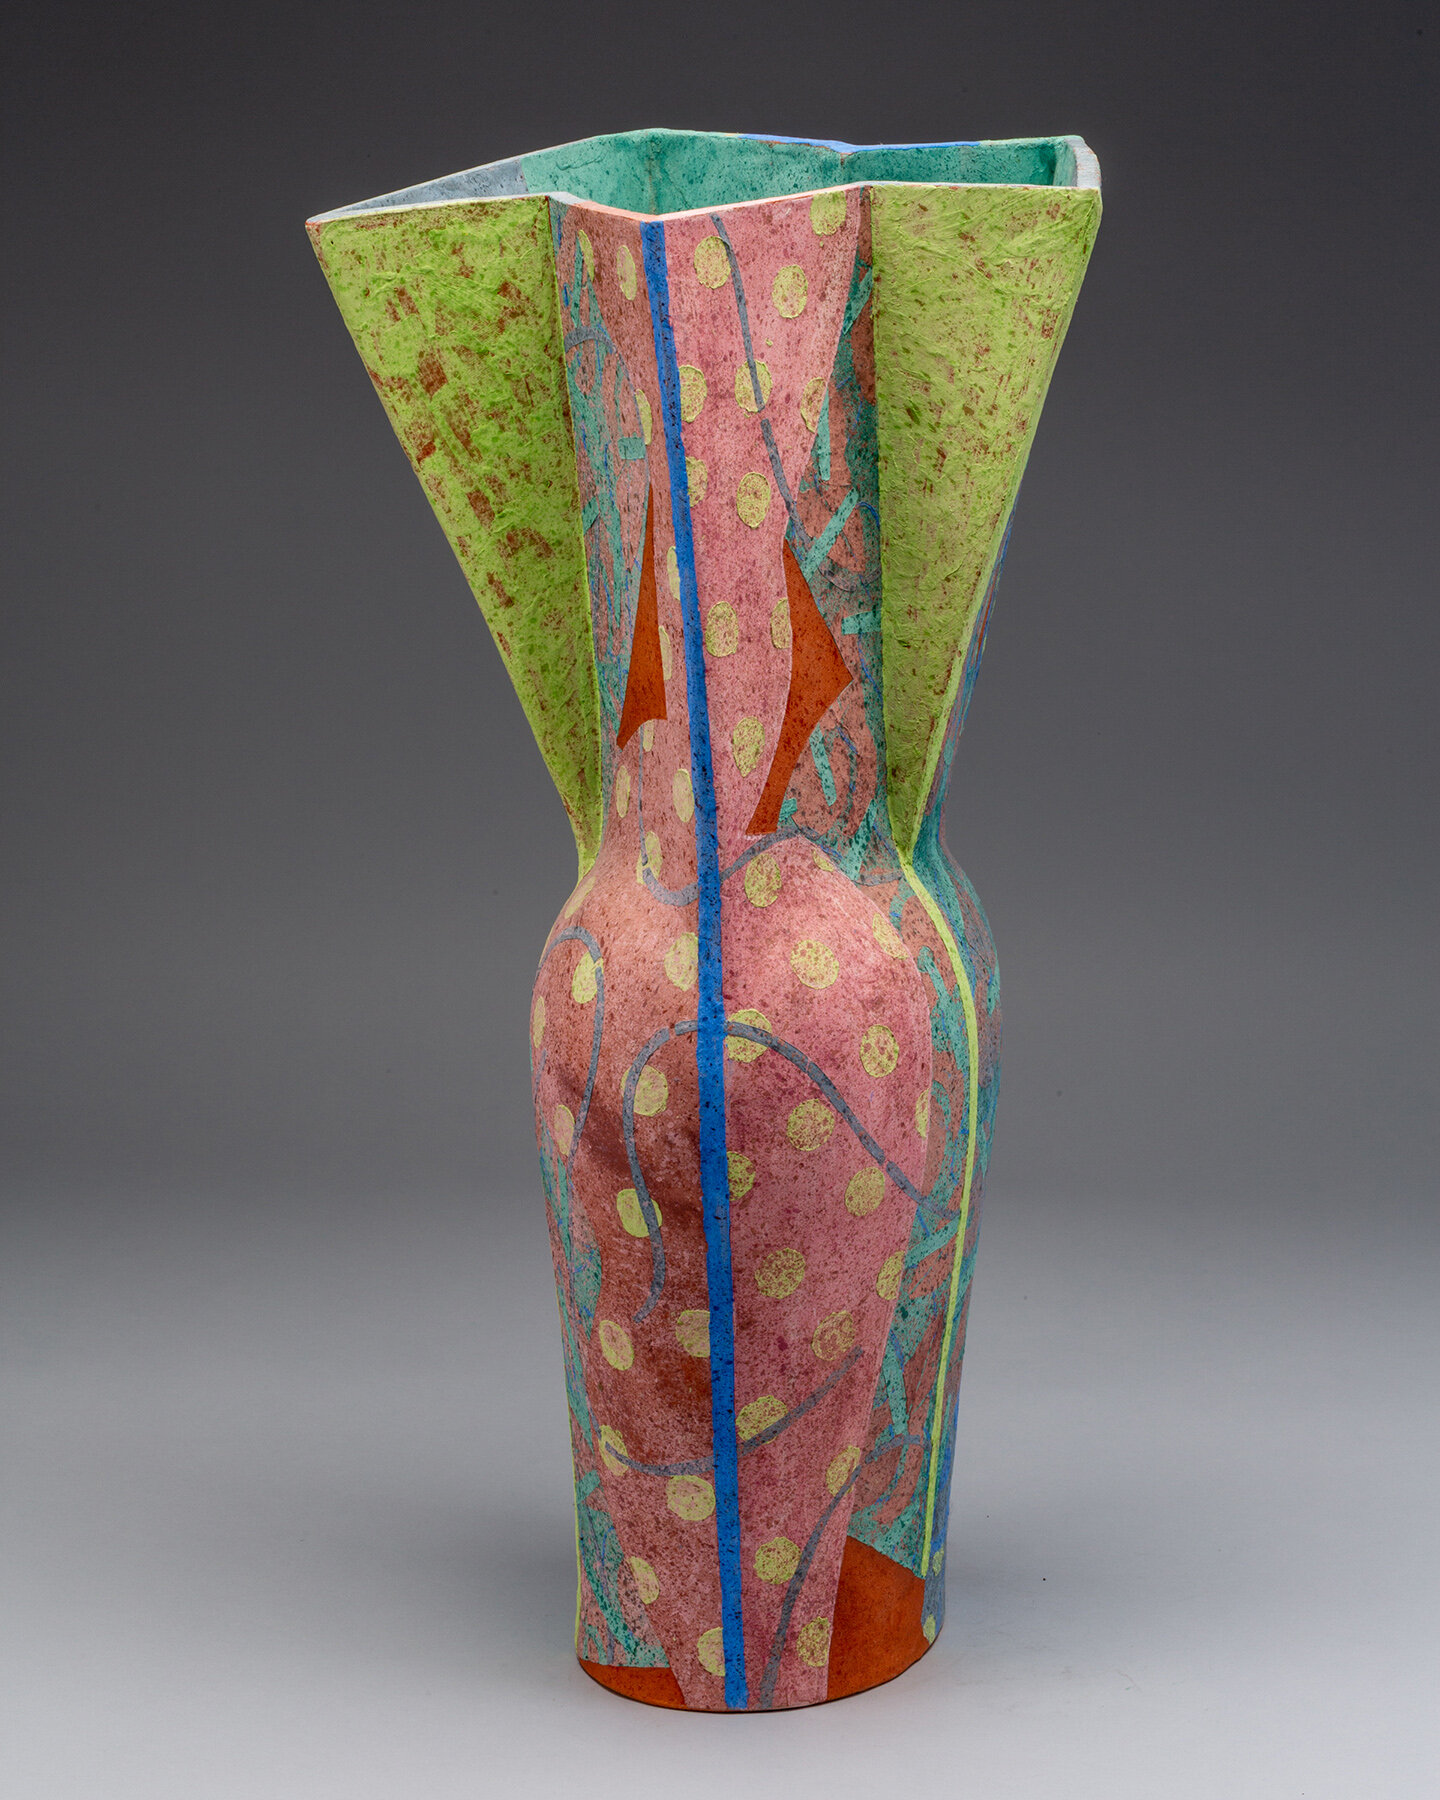  Andrea Gill (American, b.&nbsp;1948), Tall Vase,&nbsp;1991, Earthenware, 24 x&nbsp;14 in., Signed on base, © Andrea Gill 